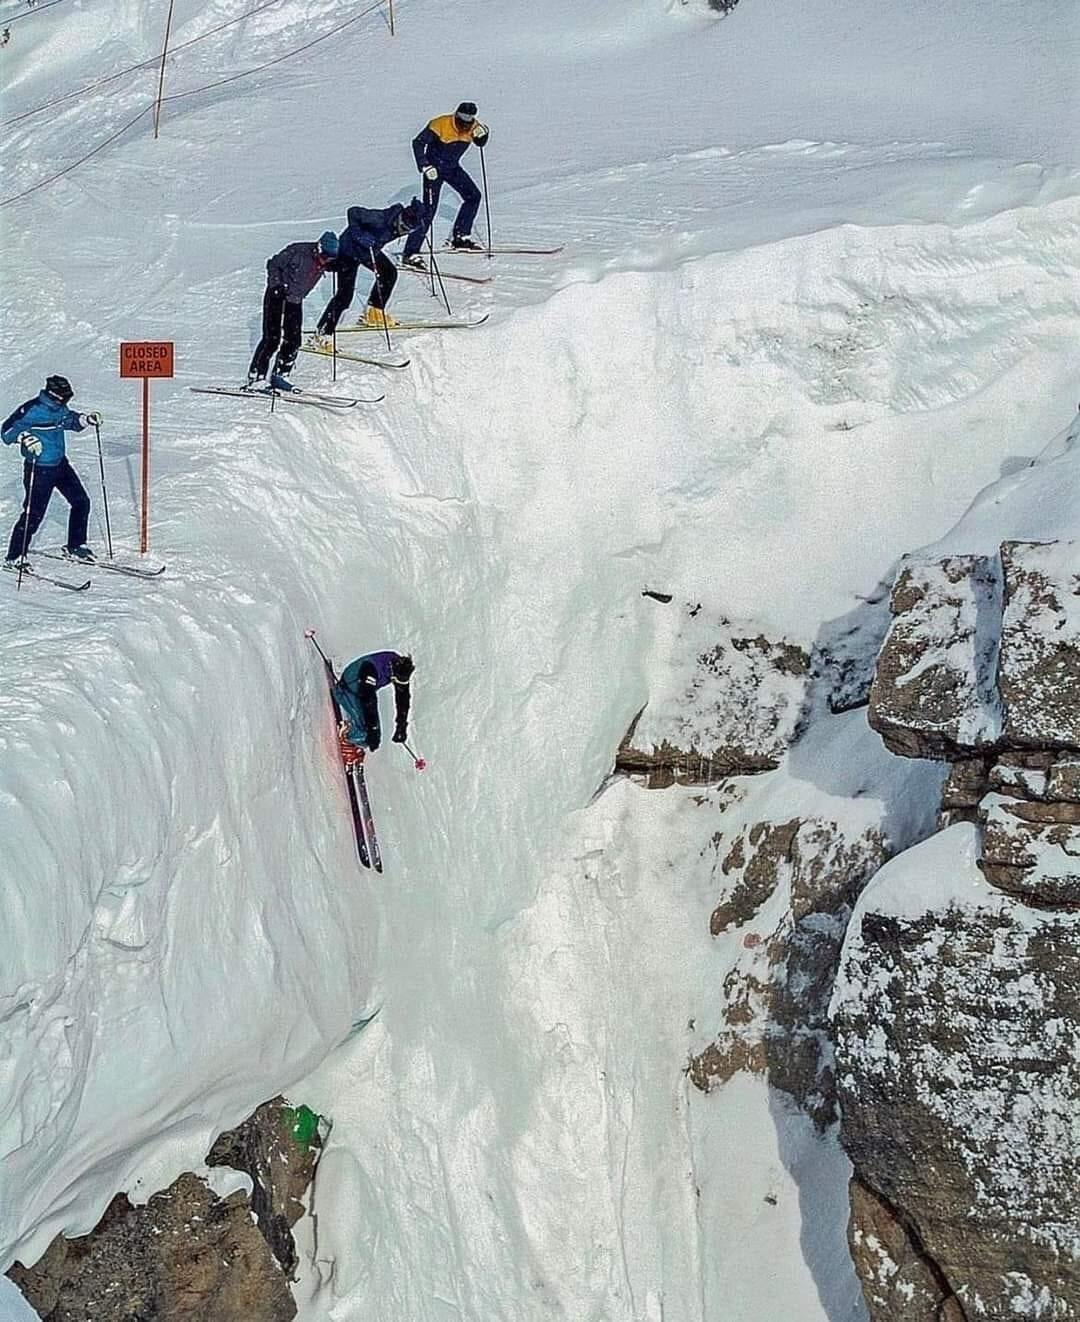 Skier going over a steep ledge